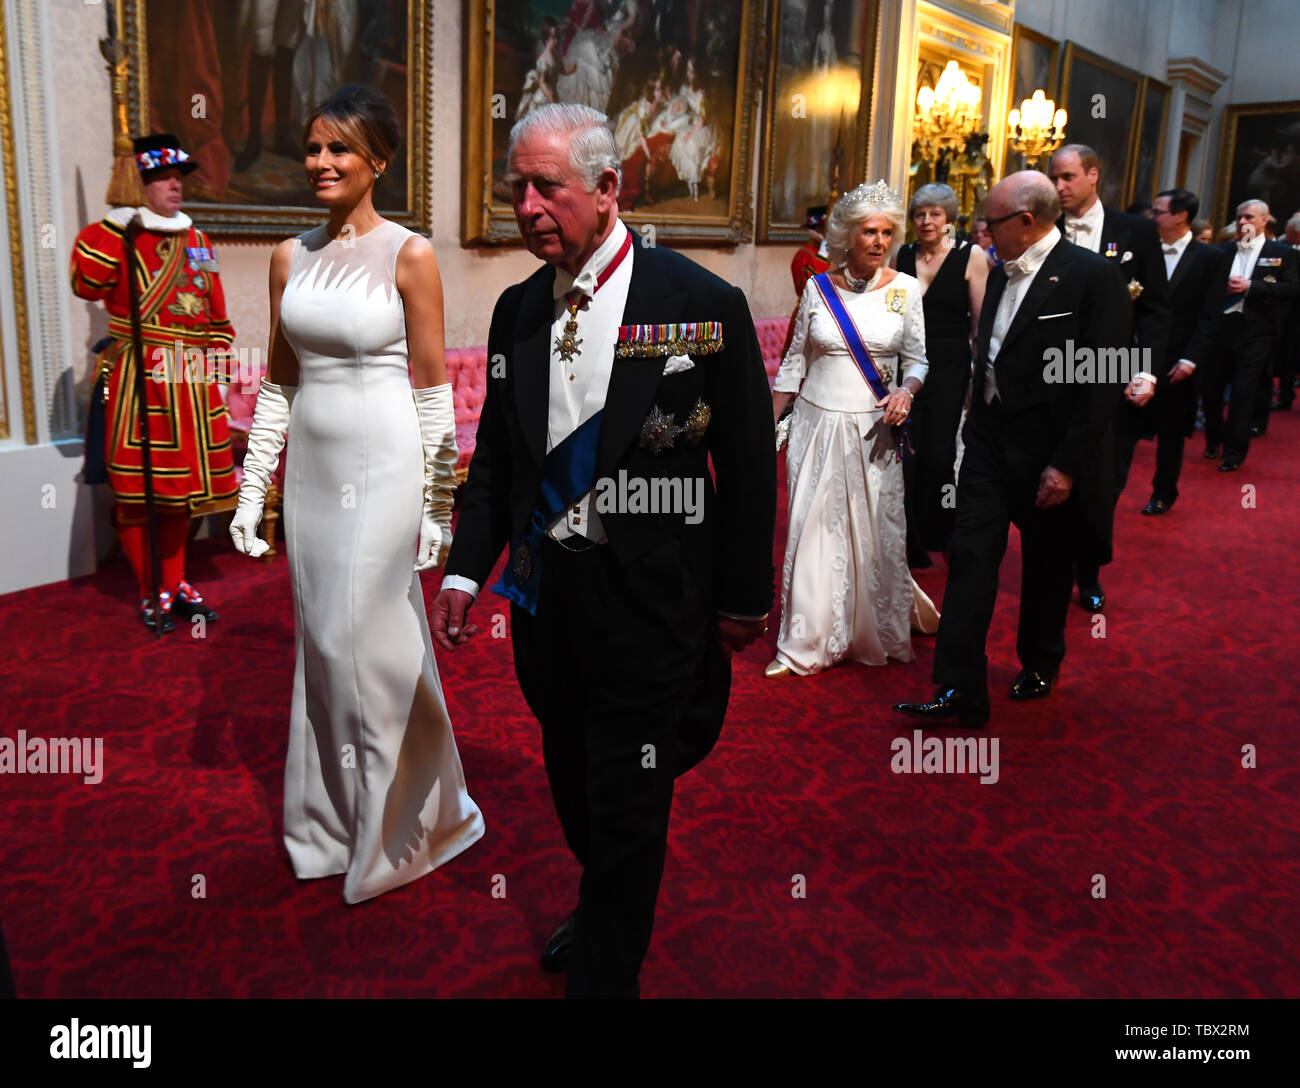 Melania Trump and the Prince of Wales arrive through the East Gallery  during the State Banquet at Buckingham Palace, London, on day one of the US  President's three day state visit to